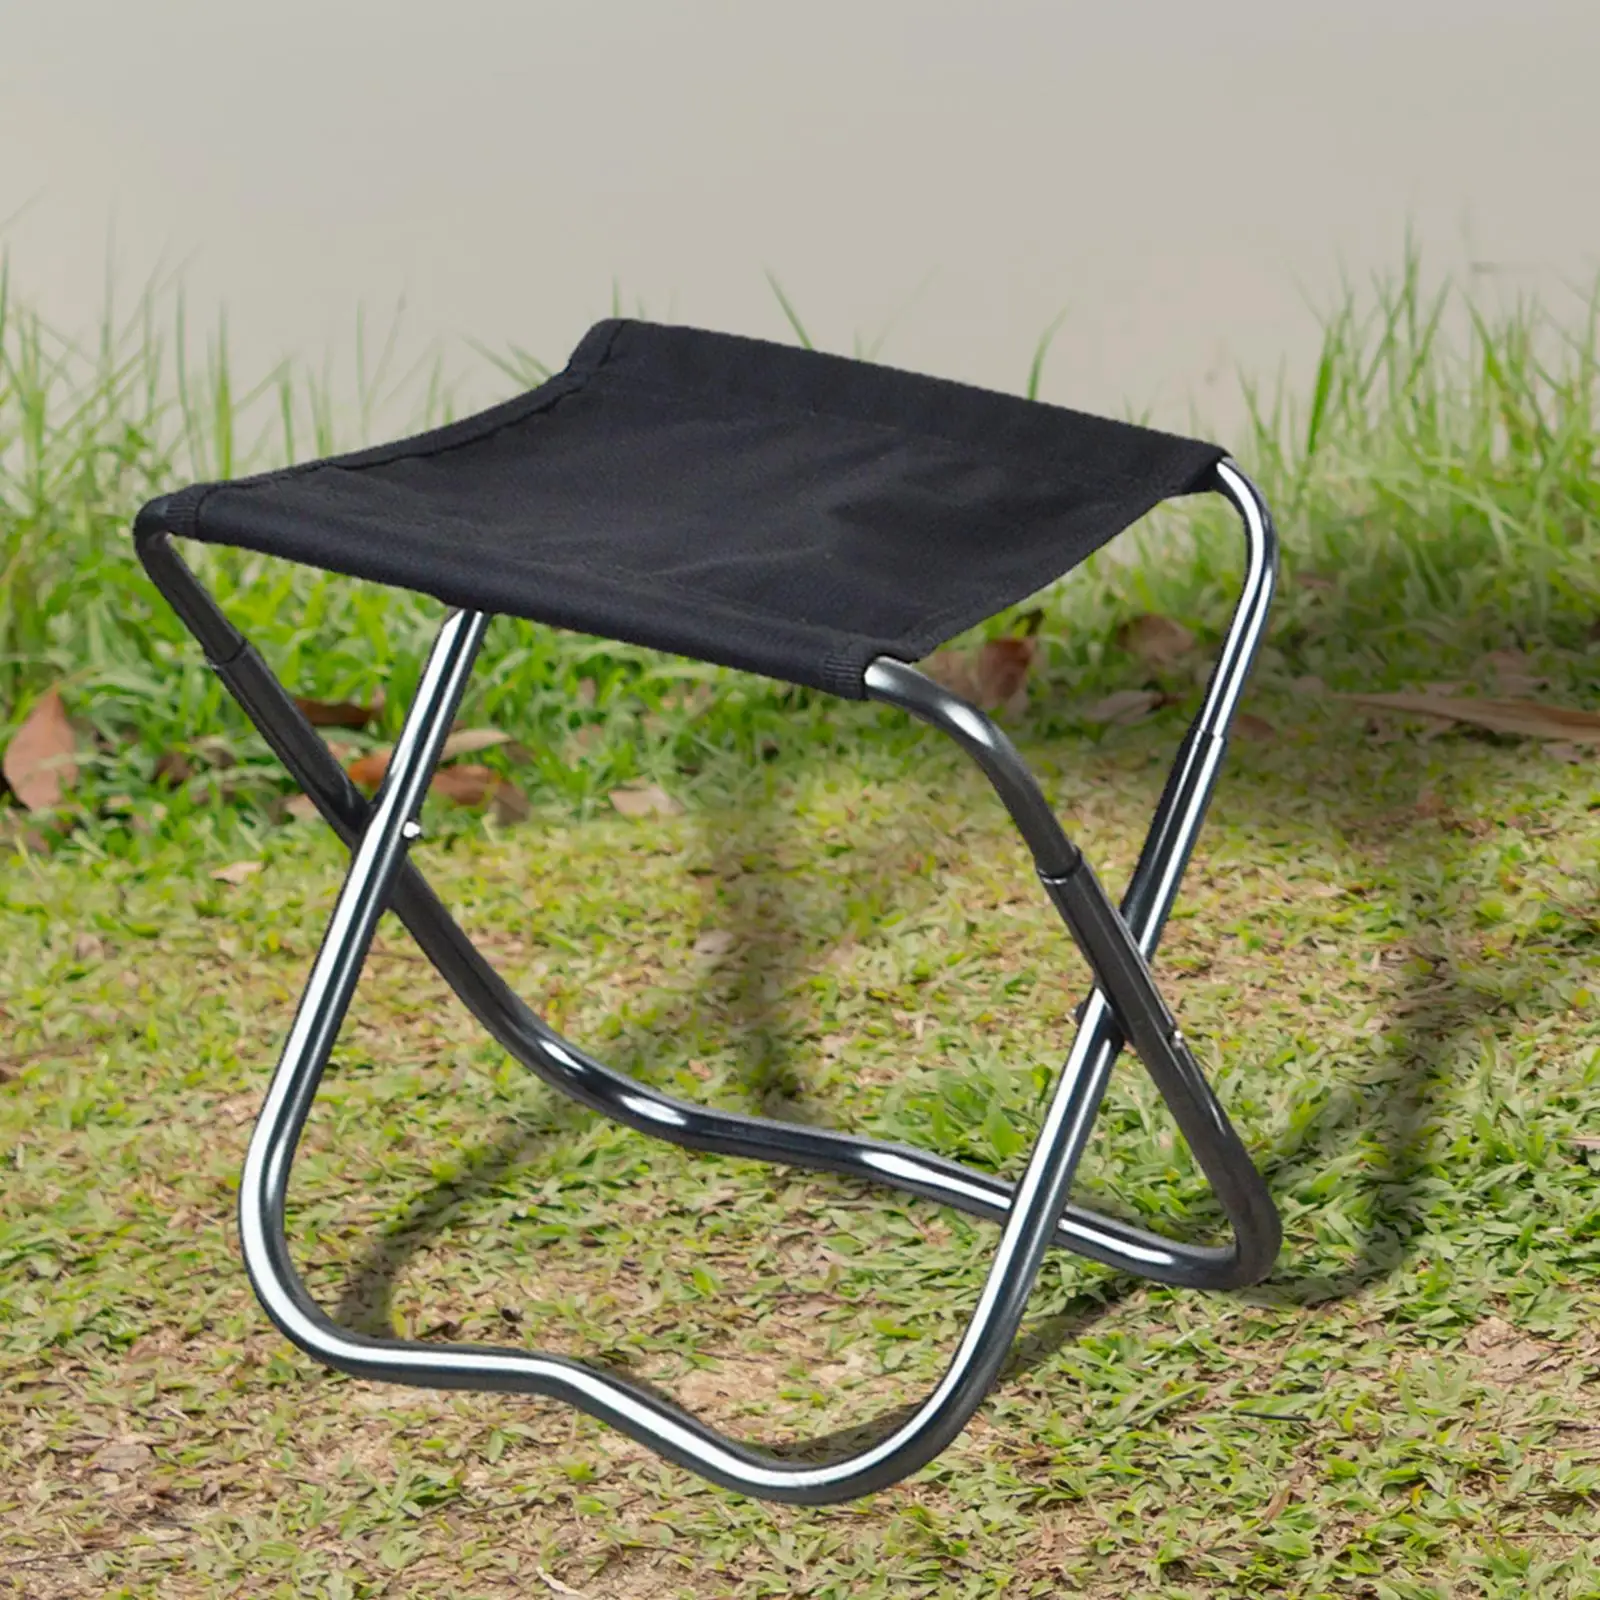 Camping Chair Collapsible Easy to Carry Fishing Seat for Camping Lawn Picnic